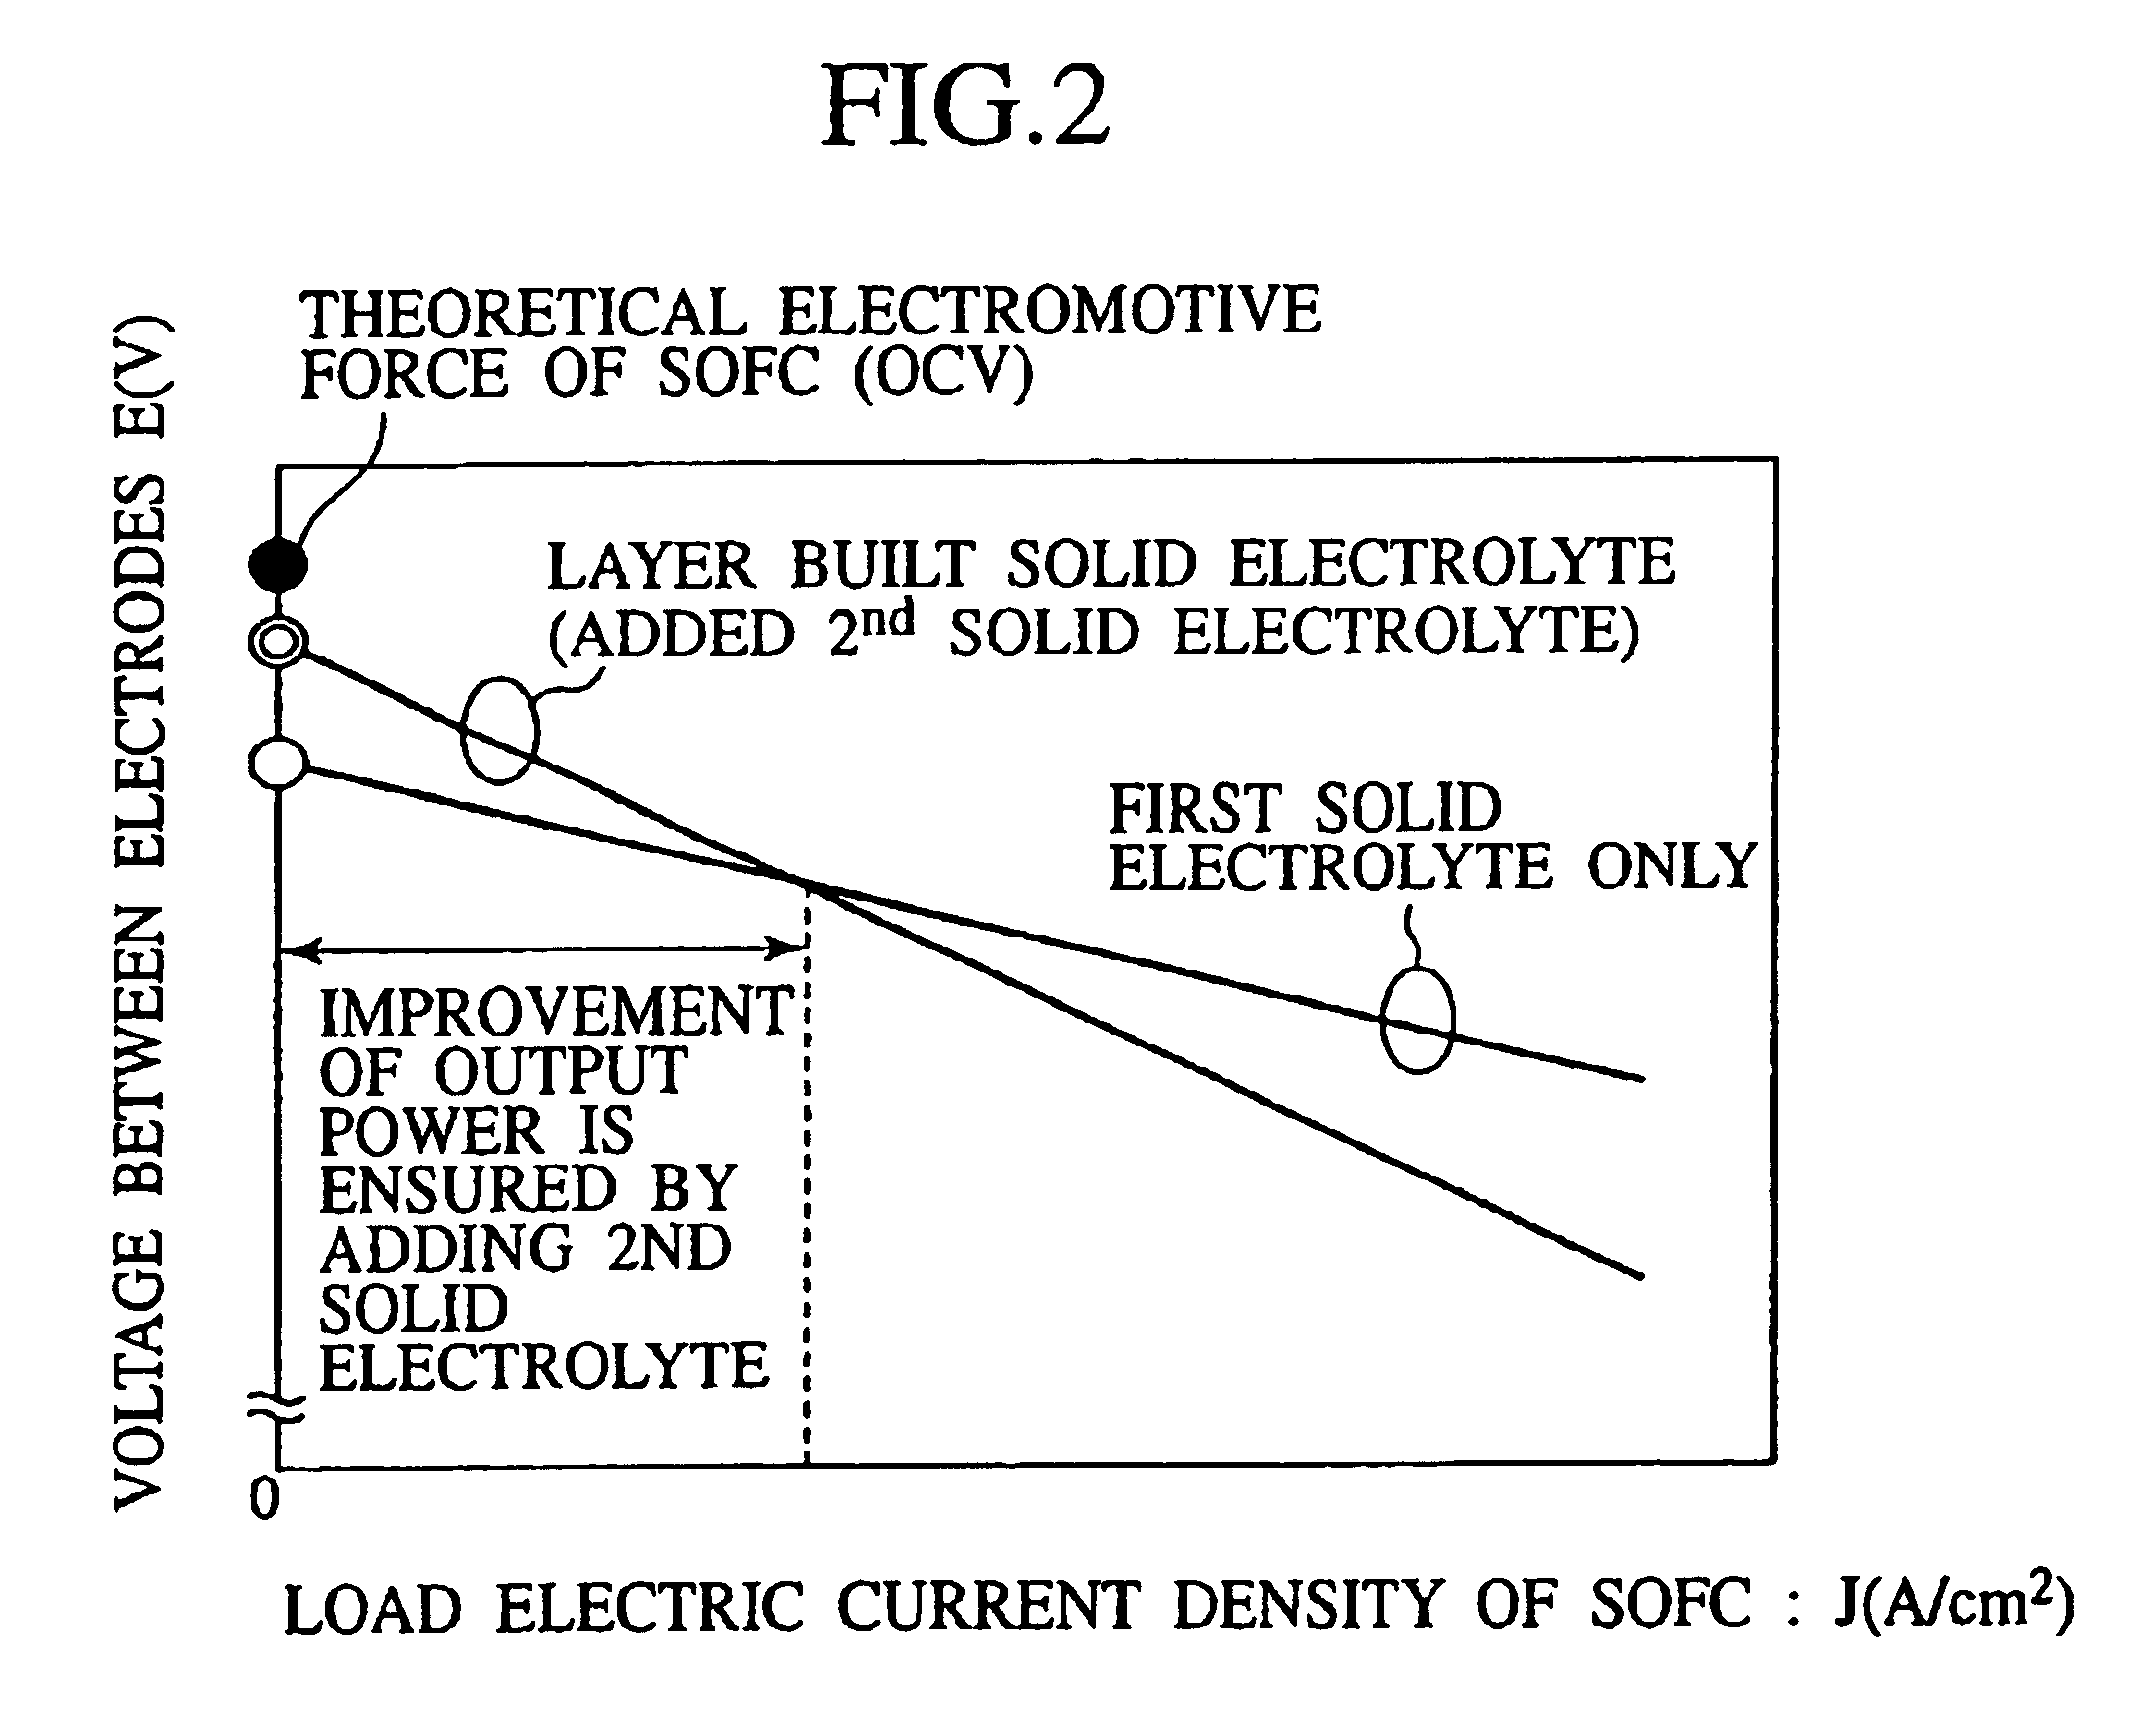 Solid oxide fuel cell having perovskite solid electrolytes